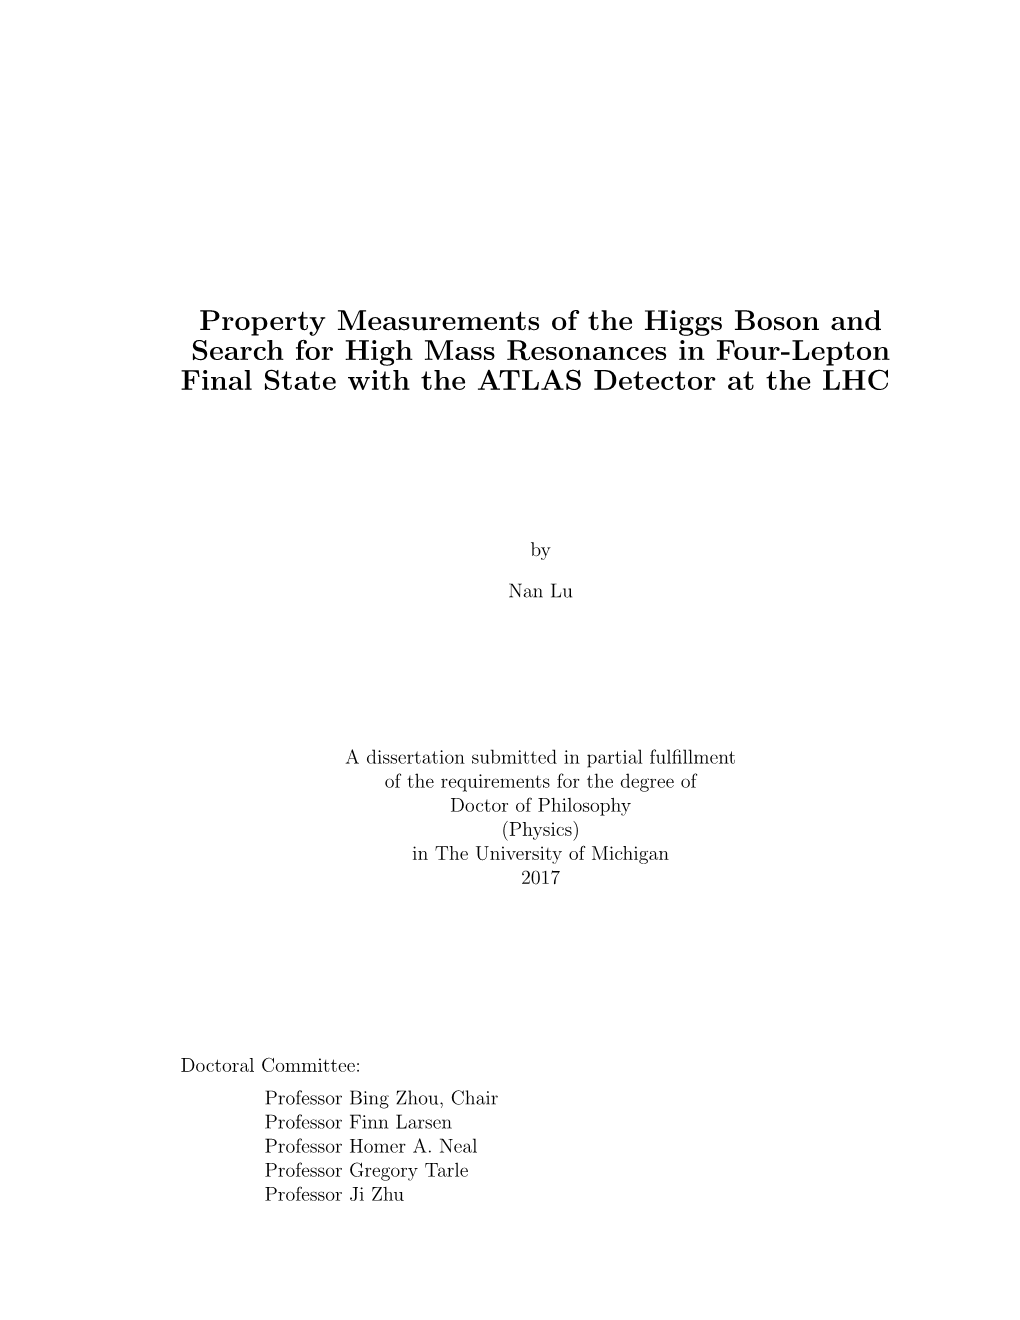 Property Measurements of the Higgs Boson and Search for High Mass Resonances in Four-Lepton Final State with the ATLAS Detector at the LHC